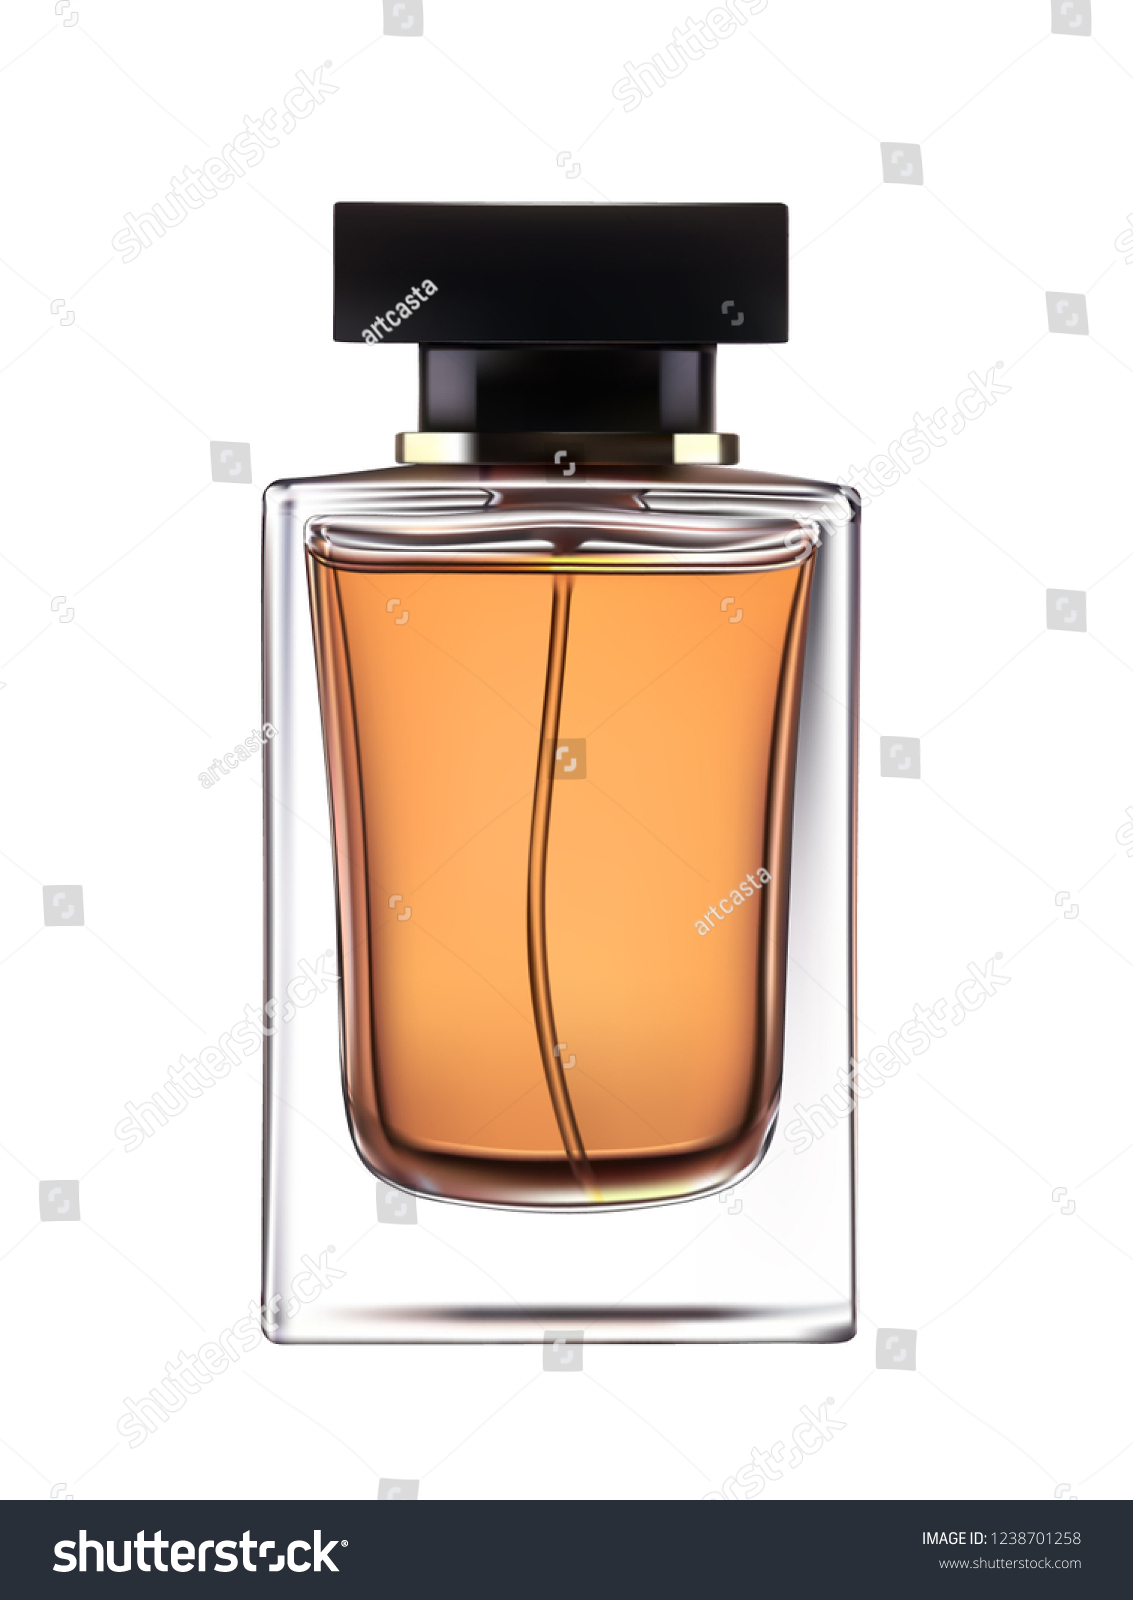 SVG of Highly realistic image of a bottle of perfume on a white background svg